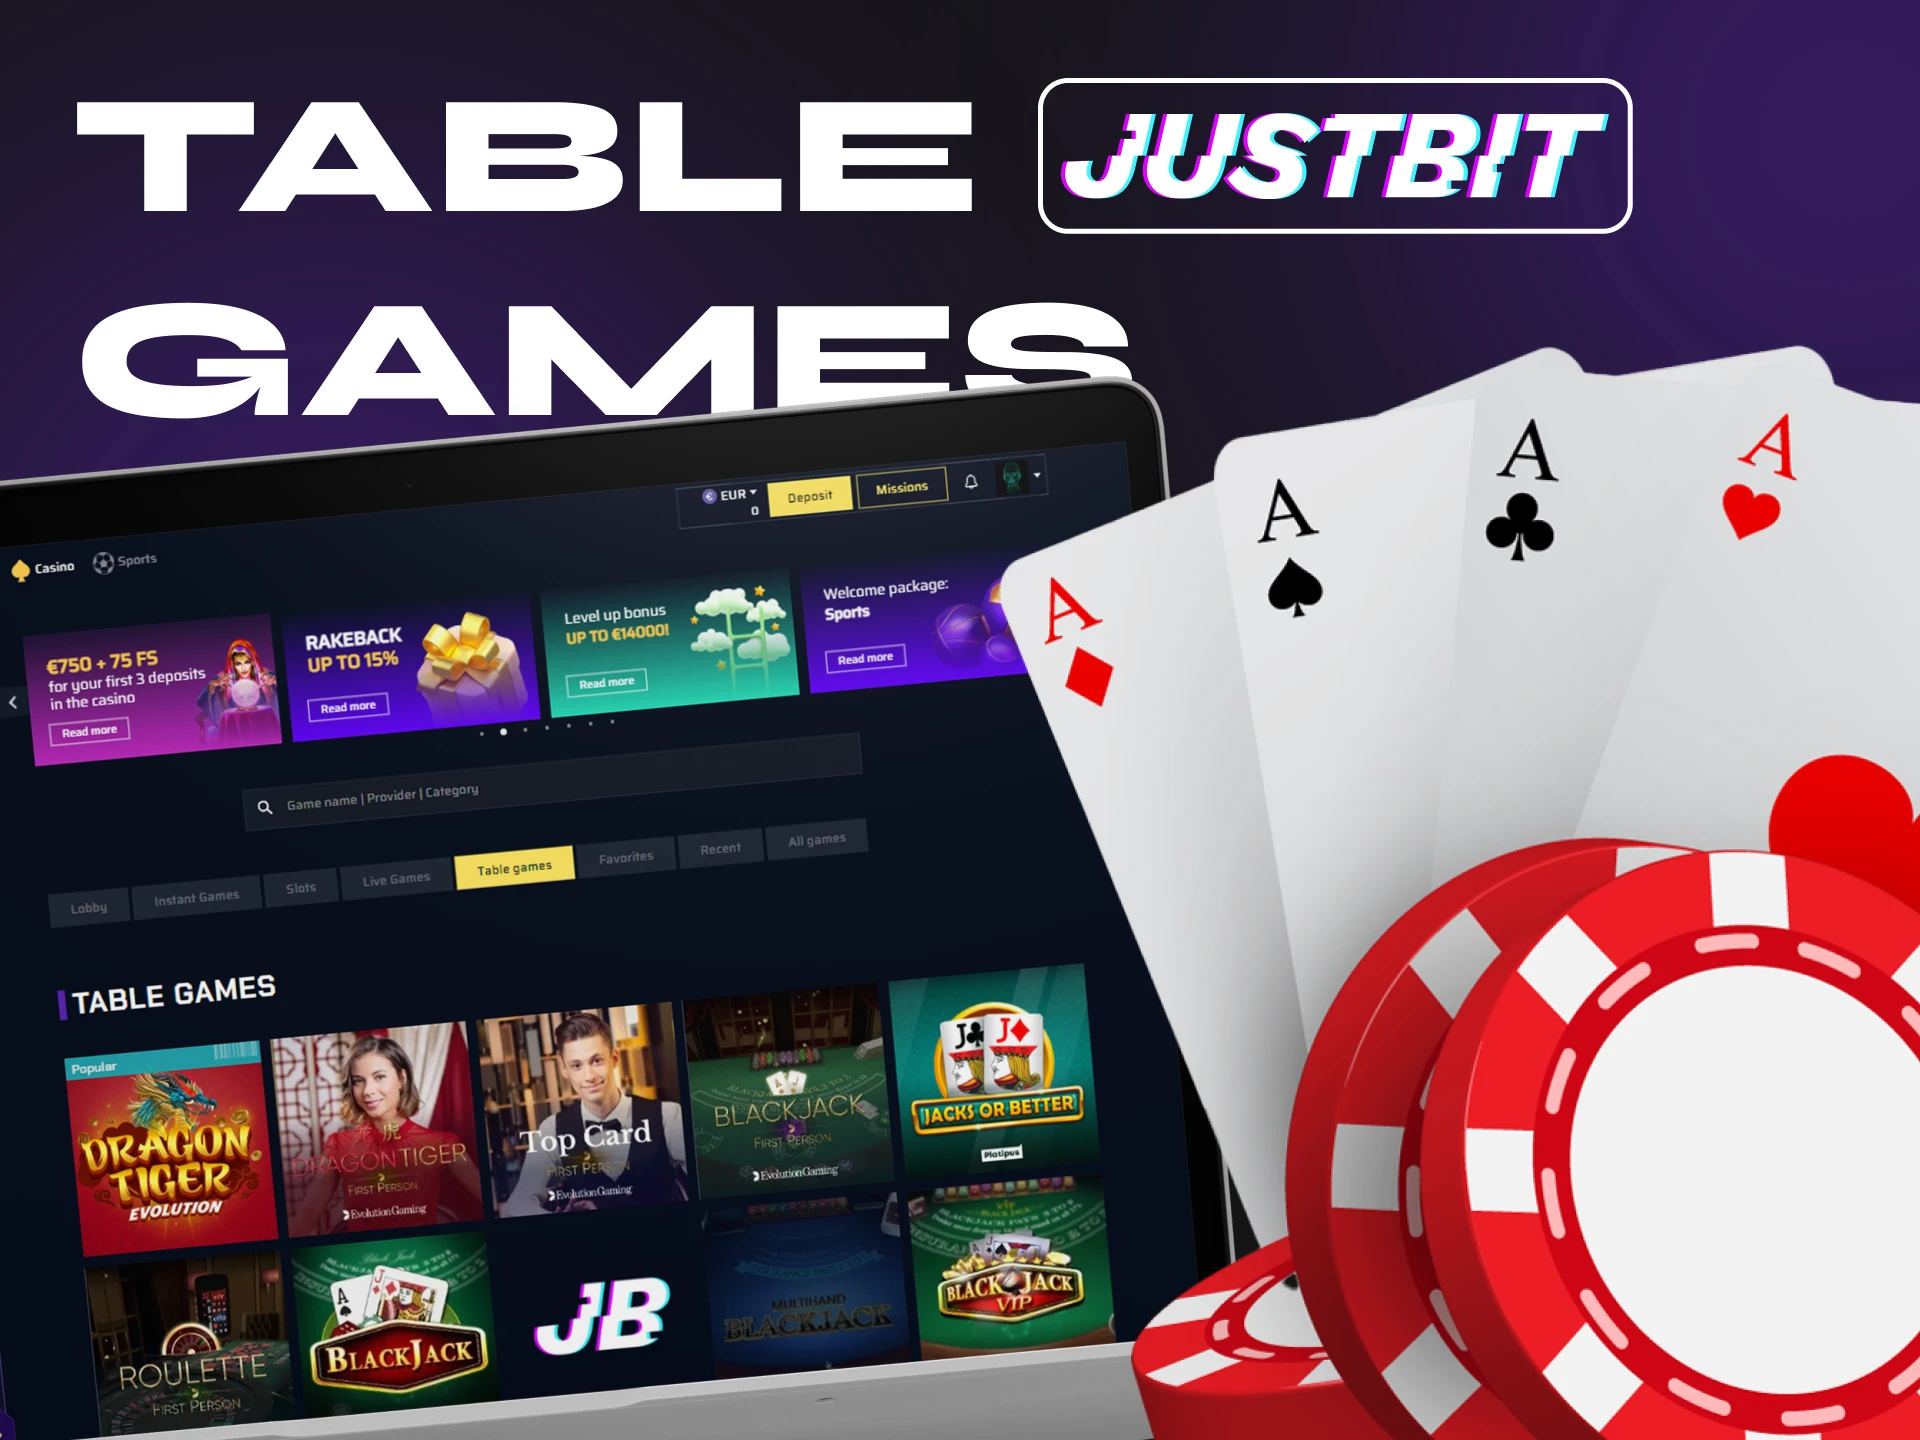 At Justbit crypto casino, the table games section offers many popular games.